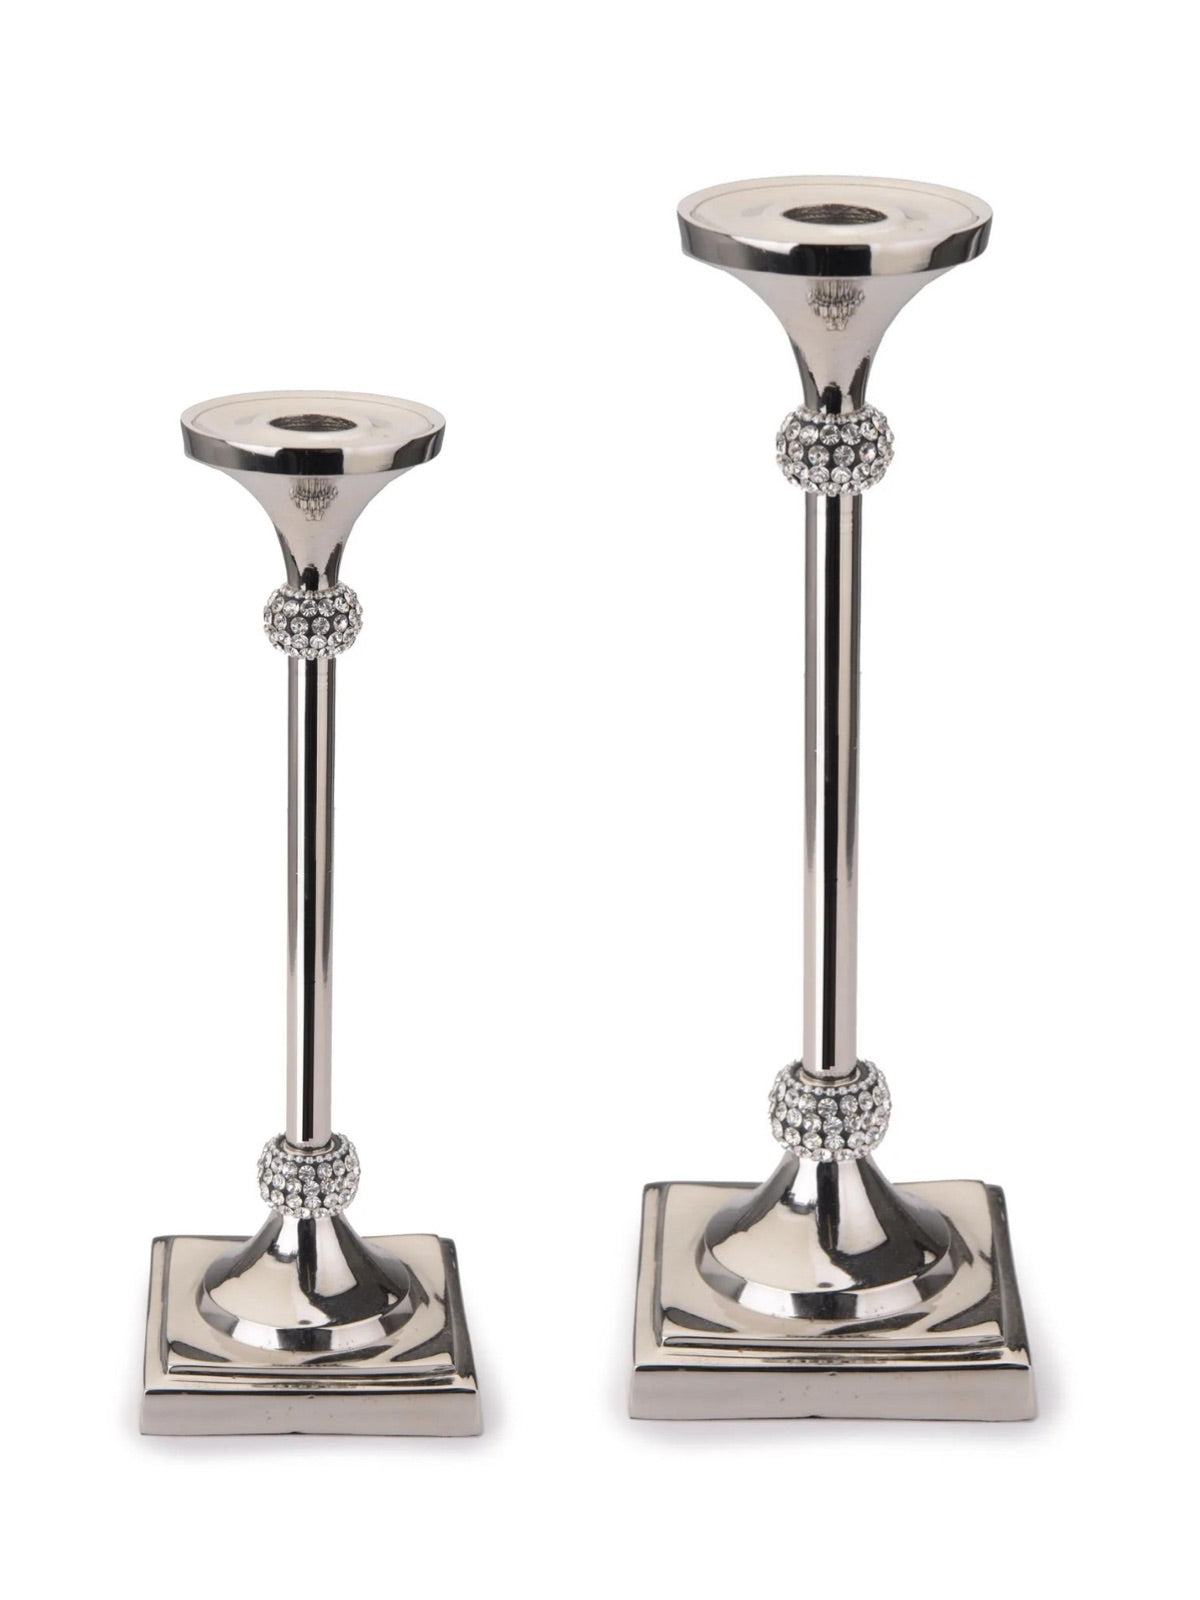 Hammered Stainless Steel Candlestick Holders With Sparkling Diamond Stones, Available in 2 Sizes. 